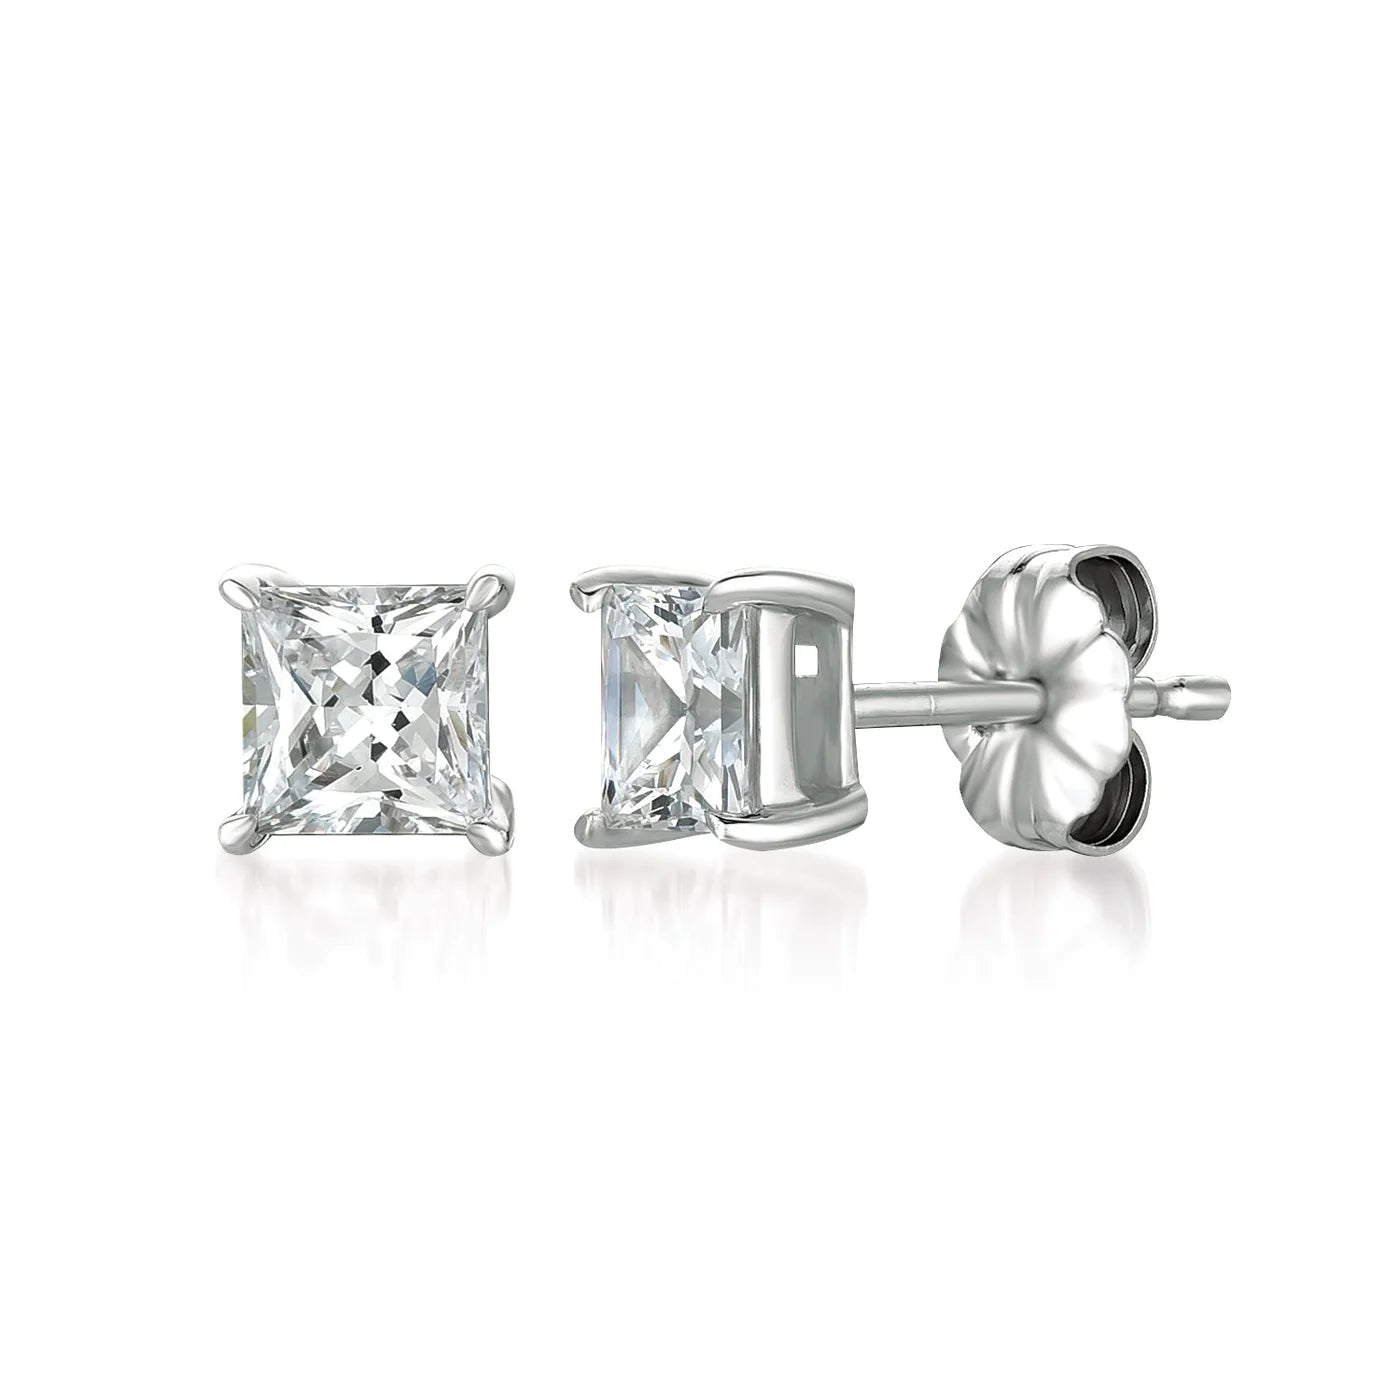 Solitaire Princess Stud Earrings Finished in Pure Platinum- 1.5 cttw